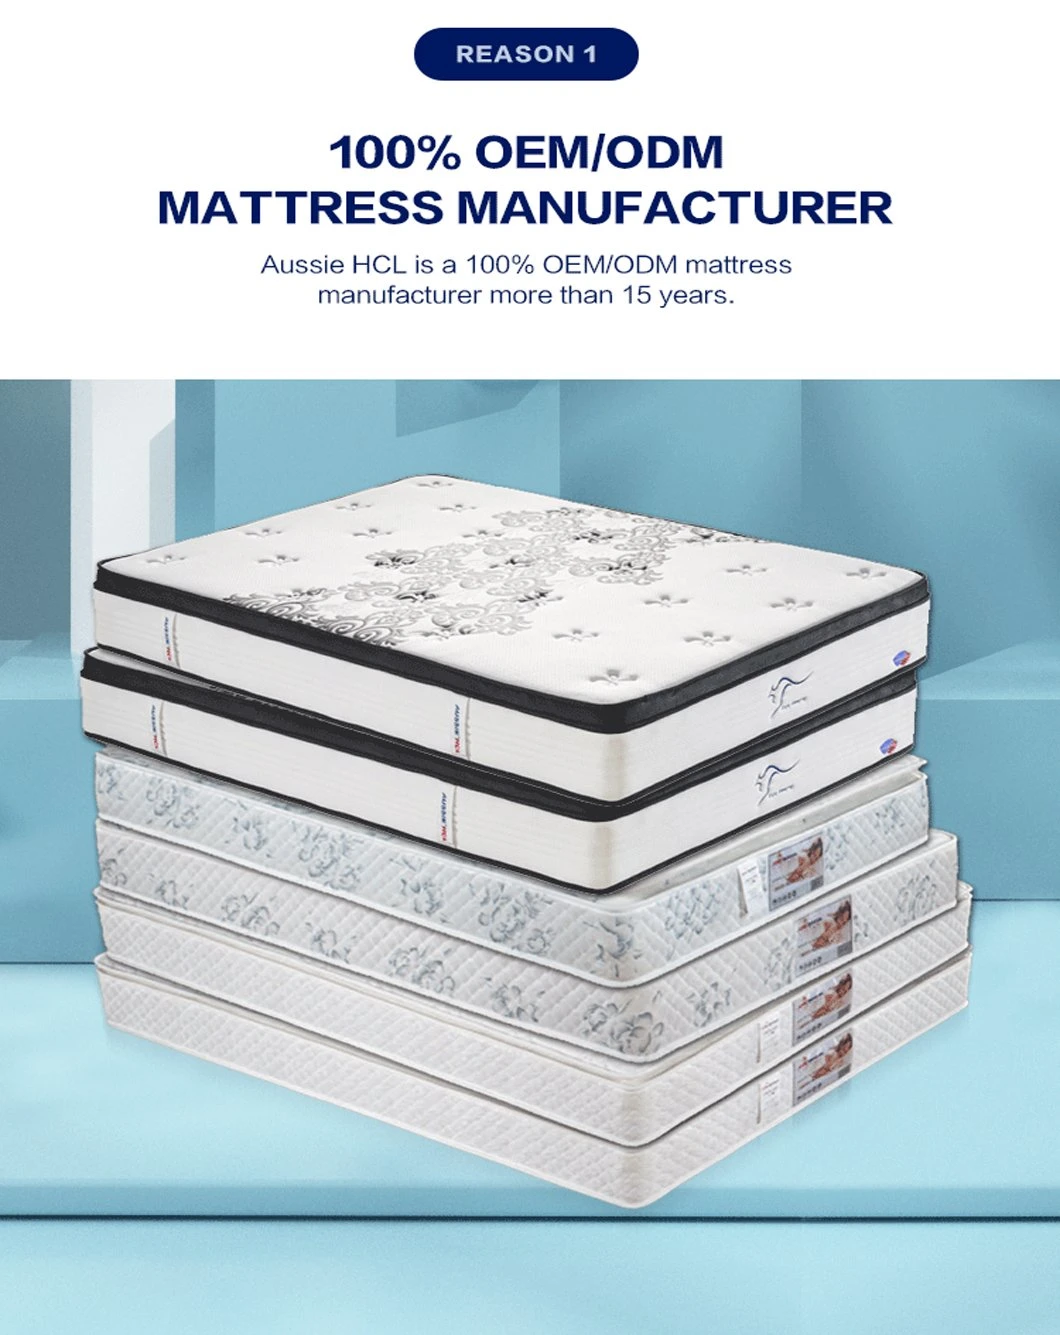 Wholesale Memory Top Mattress Pet Bed for Dogs and Cats, Available in Over 33 Color &amp; Fabric Styles